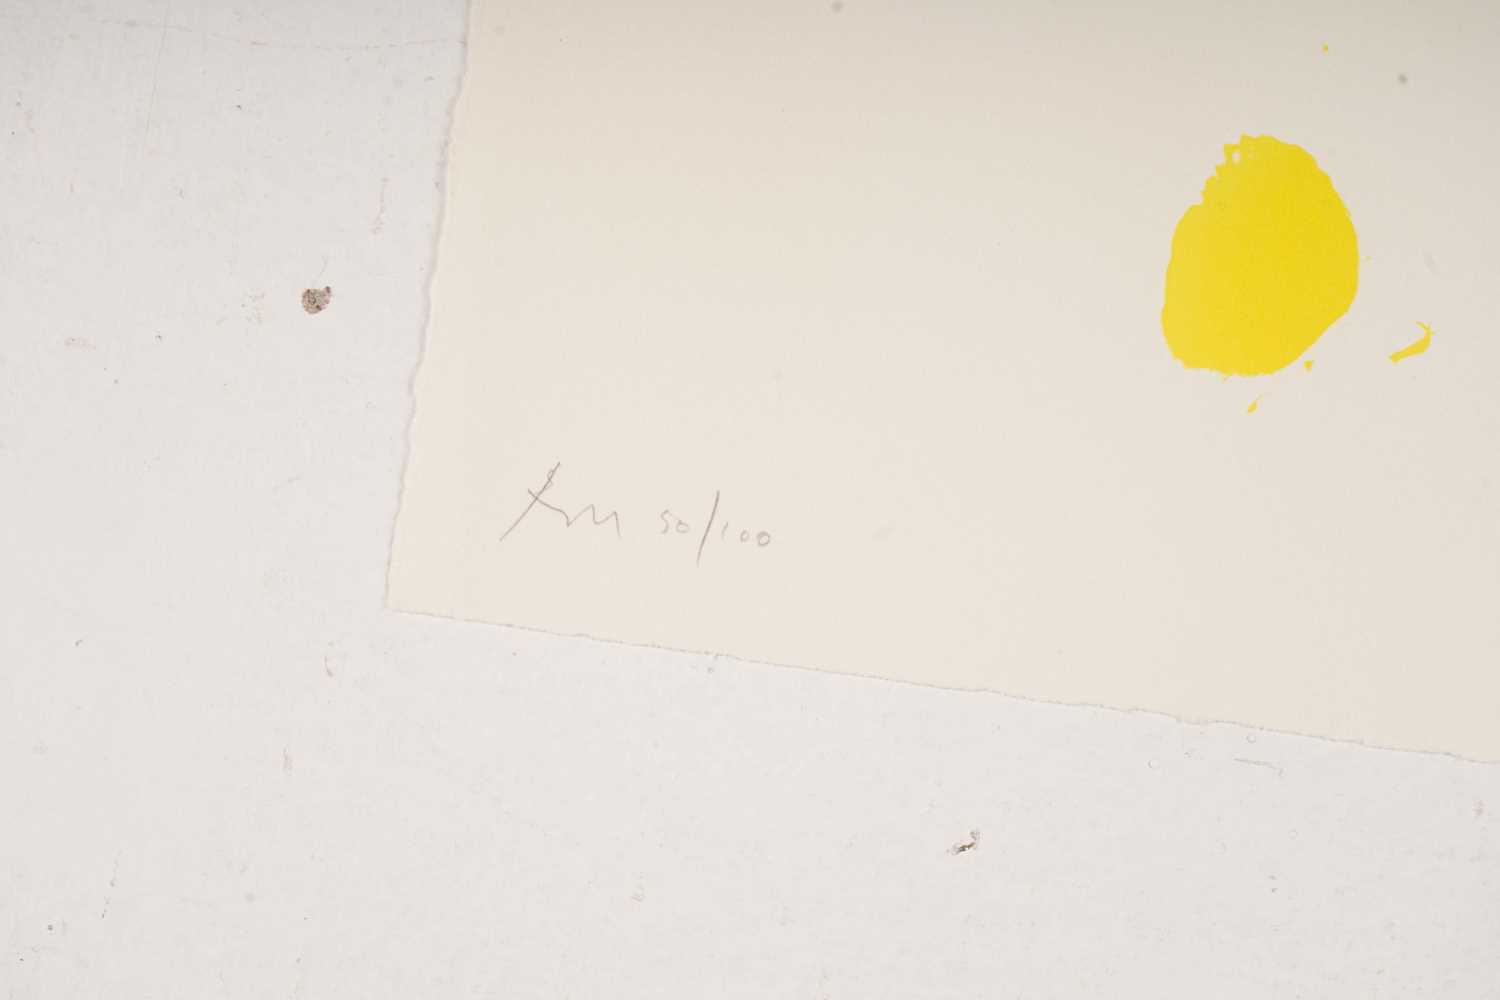 Robert Motherwell - Untitled | colour lithograph - Image 2 of 2